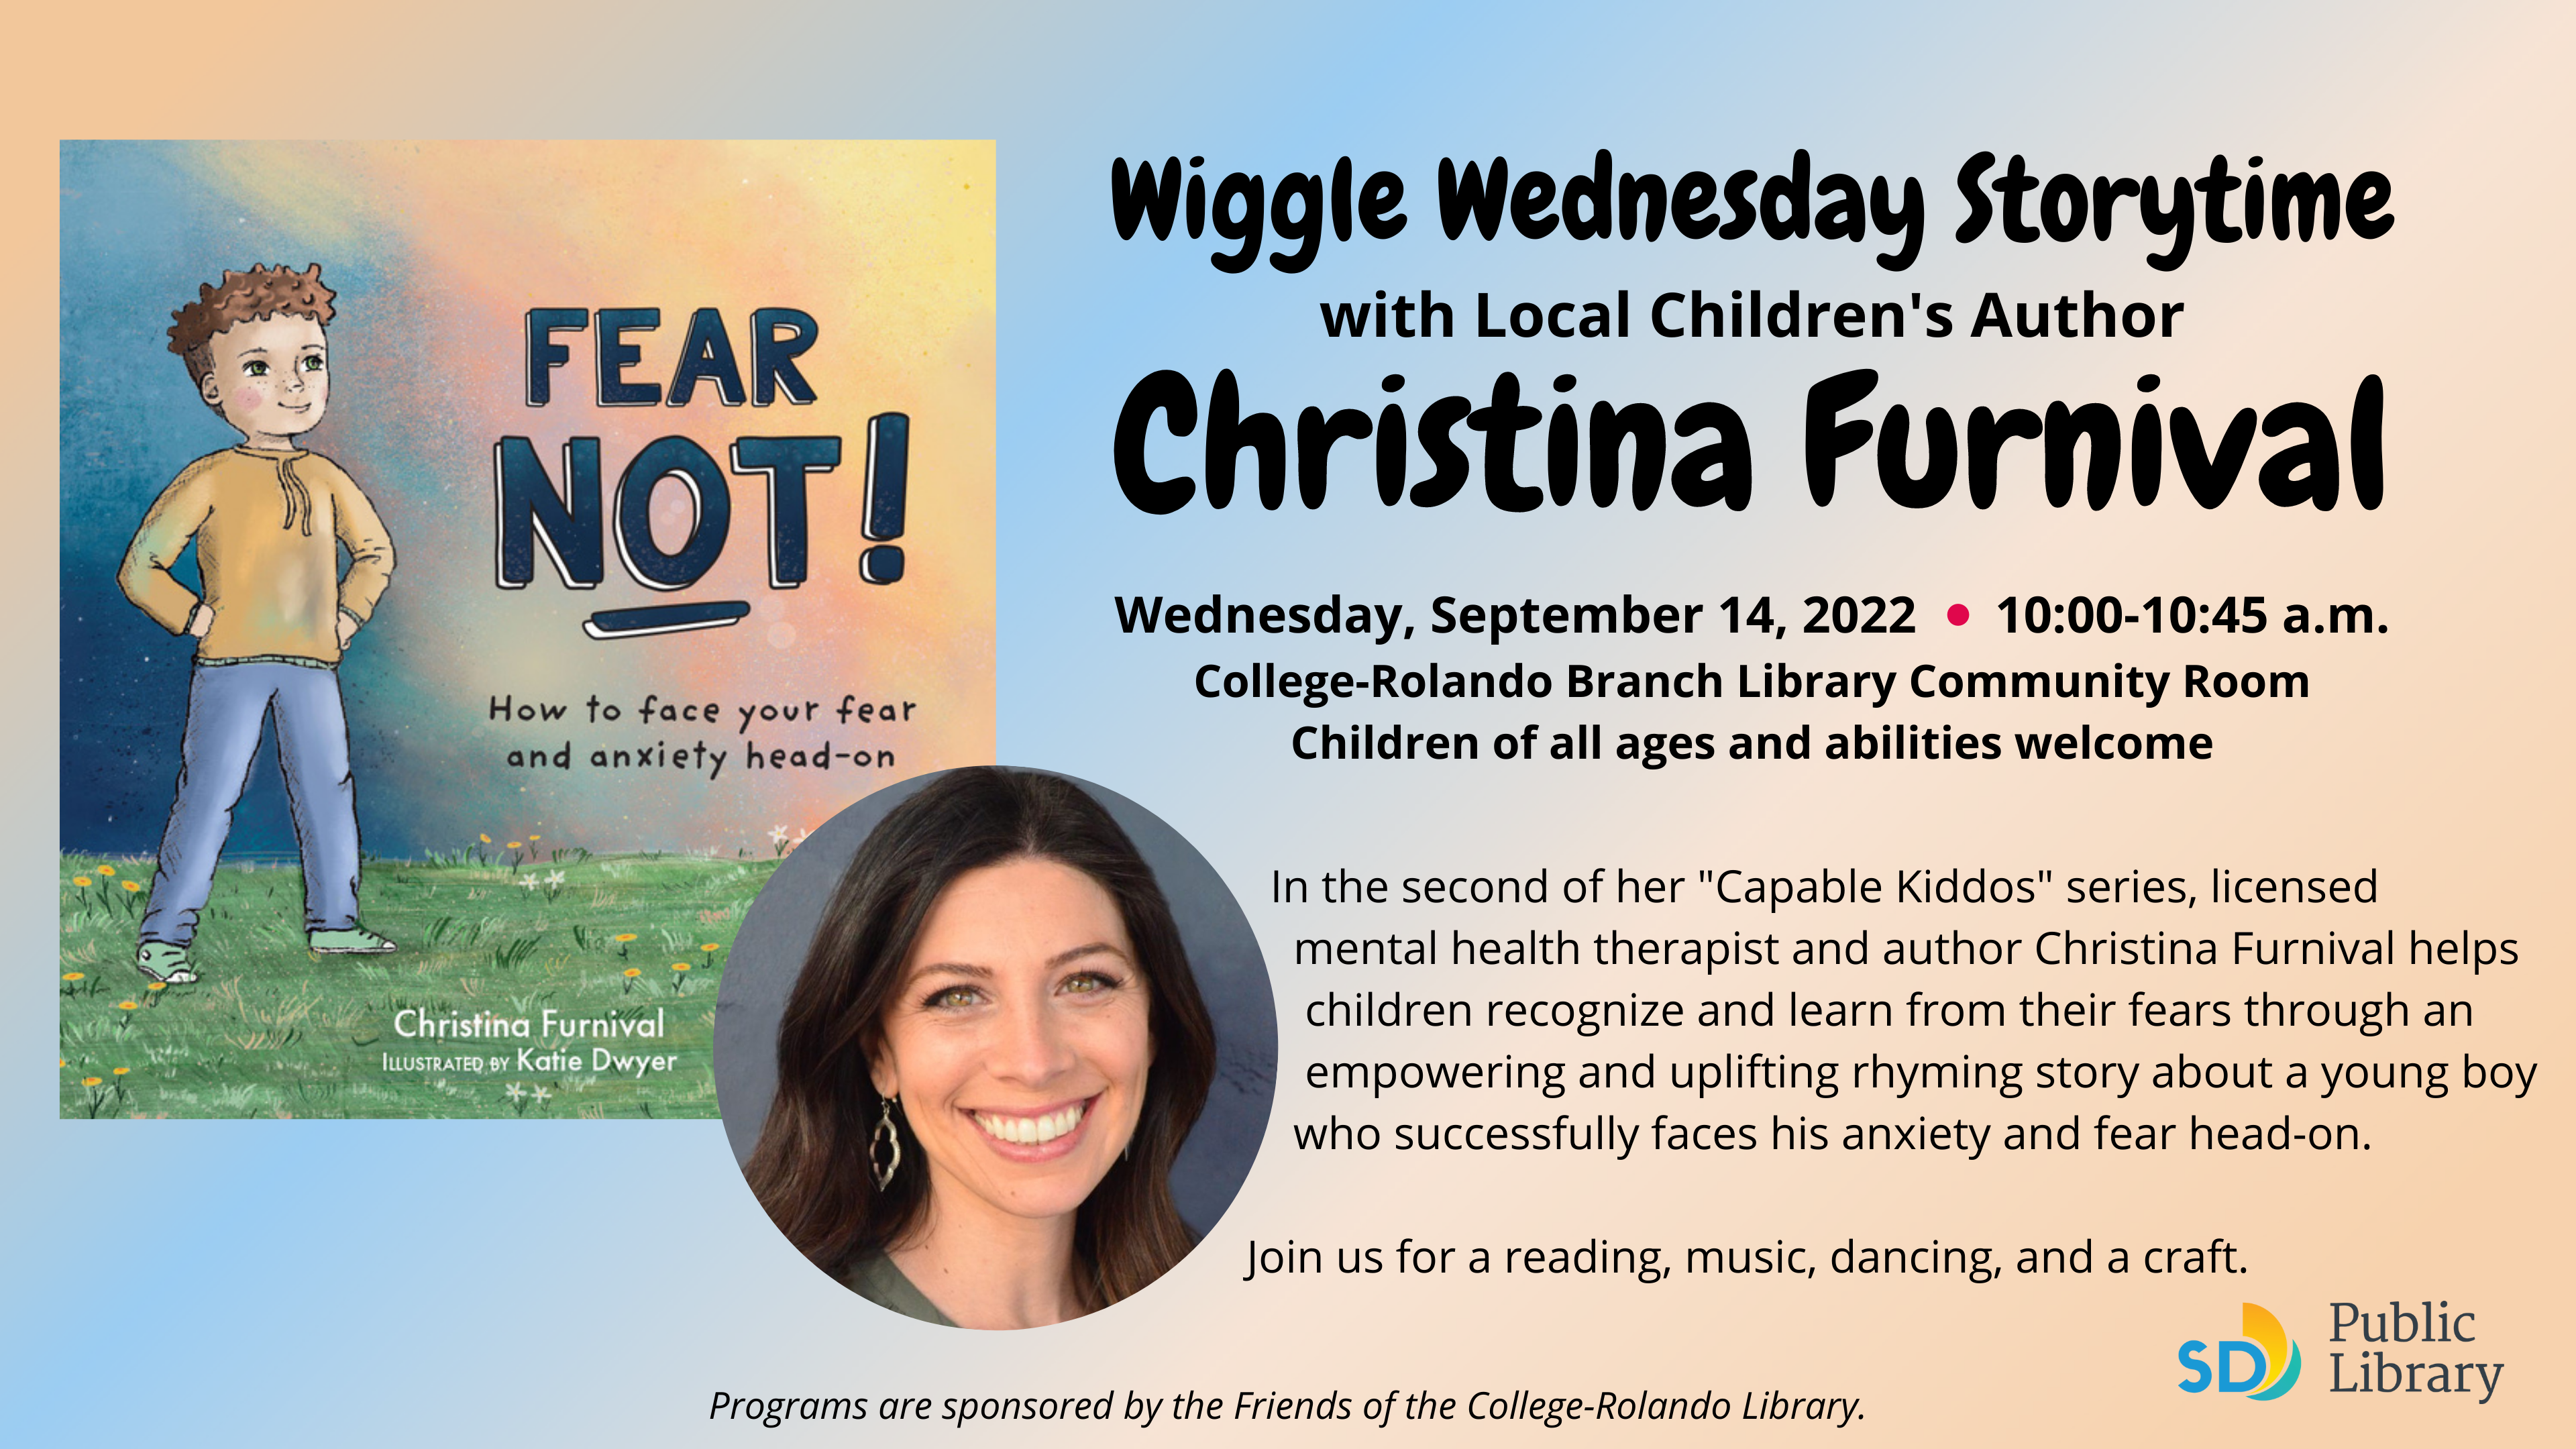 .   In the second of her "Capable Kiddos" series, licensed                   .     mental health therapist and author Christina Furnival helps     .      children recognize and learn from their fears through an      .      empowering and uplifting rhyming story about a young boy  .     who successfully faces his anxiety and fear head-on. Join us for a reading, music, dancing, and a craft.